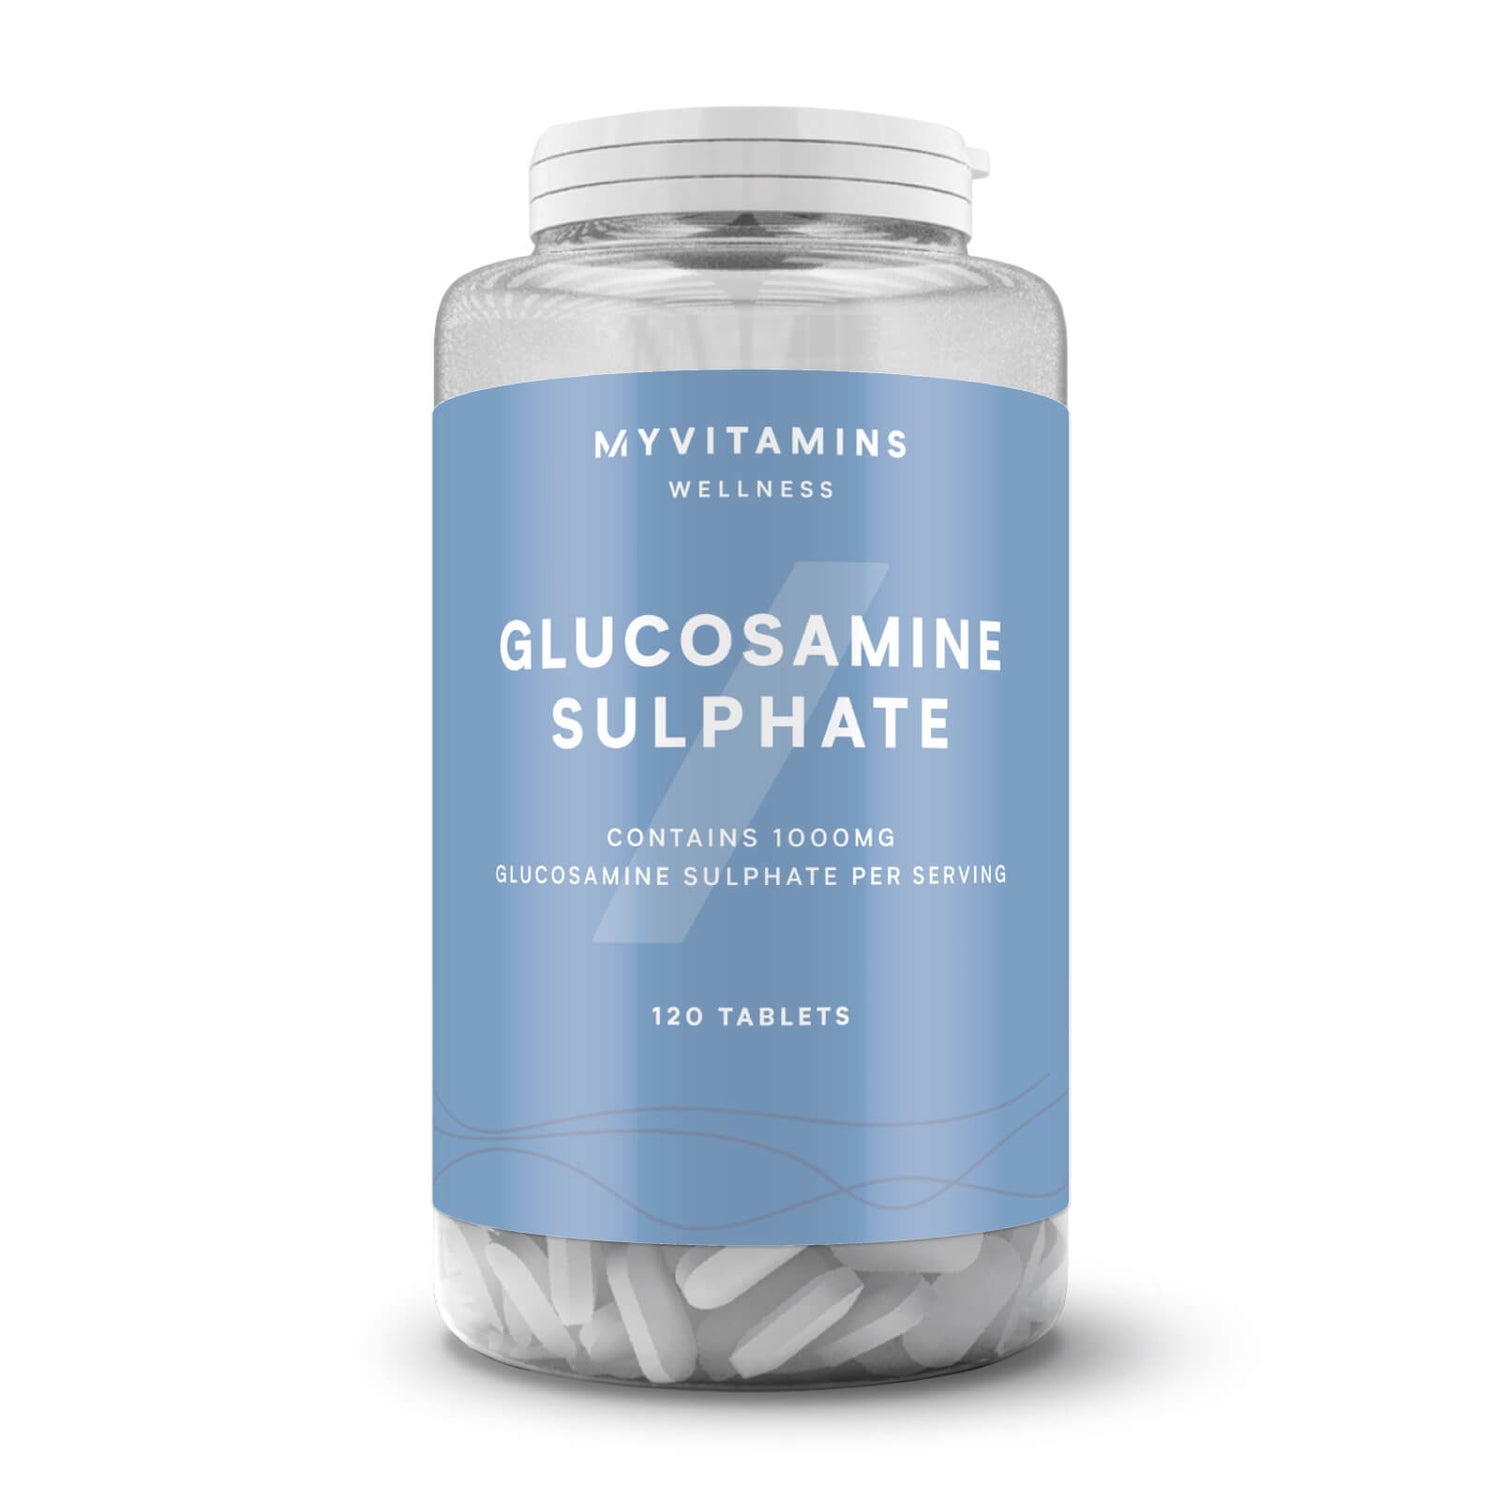 Glucosamine Sulphate Tablets - 120Tablets